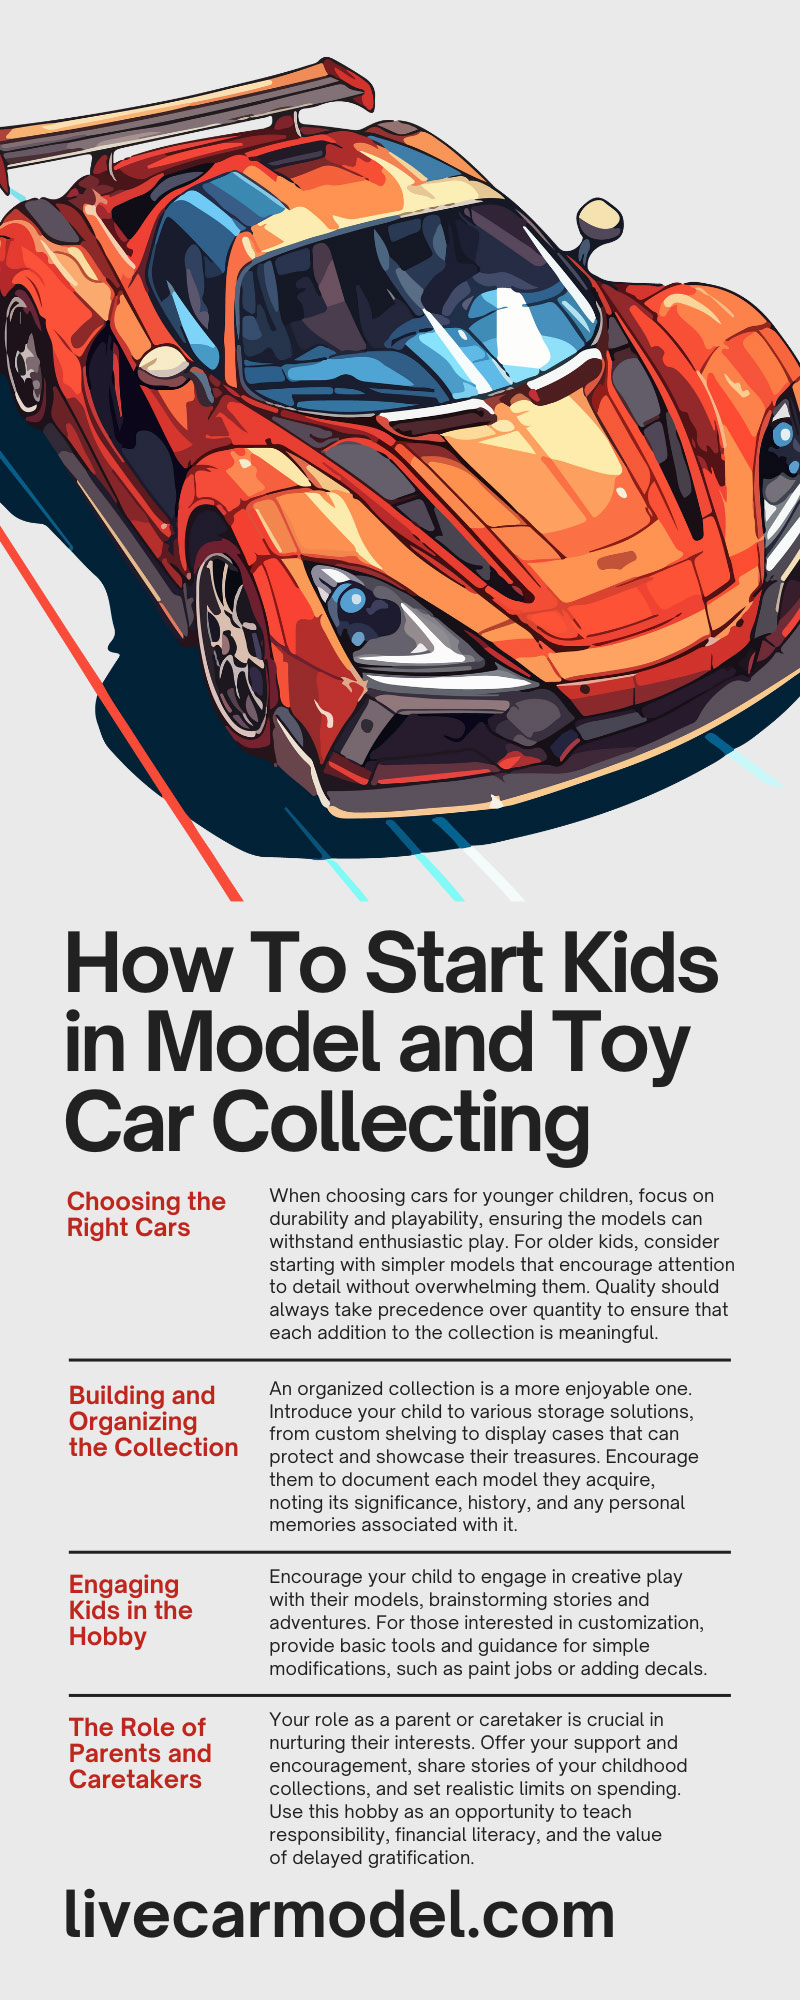 How To Start Kids in Model and Toy Car Collecting